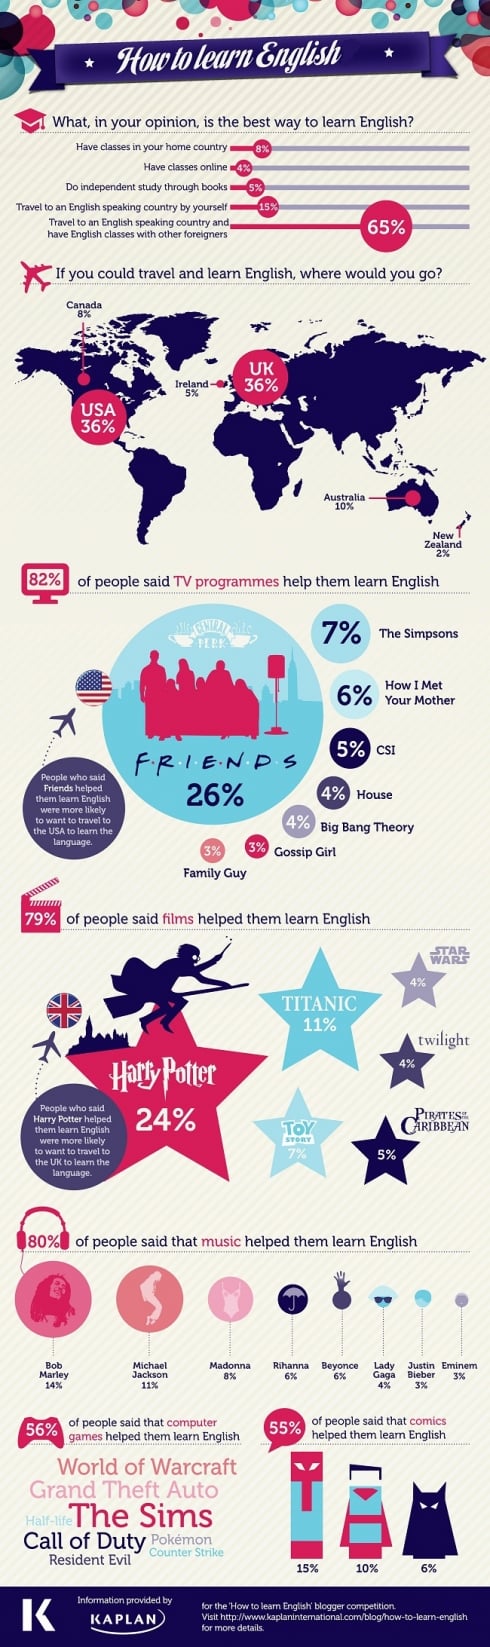 [Infographic] How to learn English | Language Trainers USA Blog